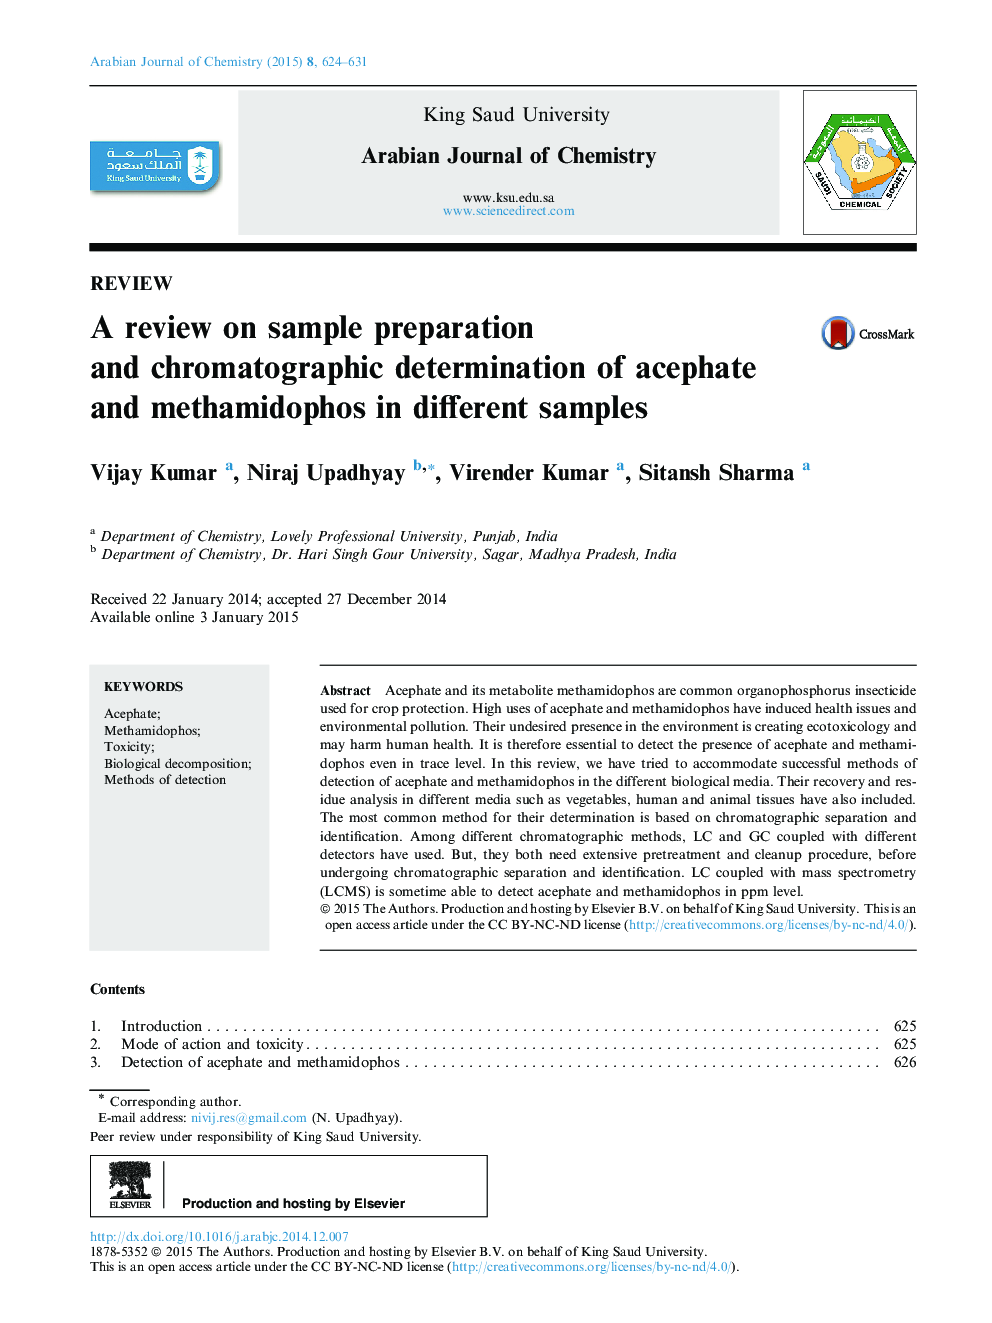 A review on sample preparation and chromatographic determination of acephate and methamidophos in different samples 